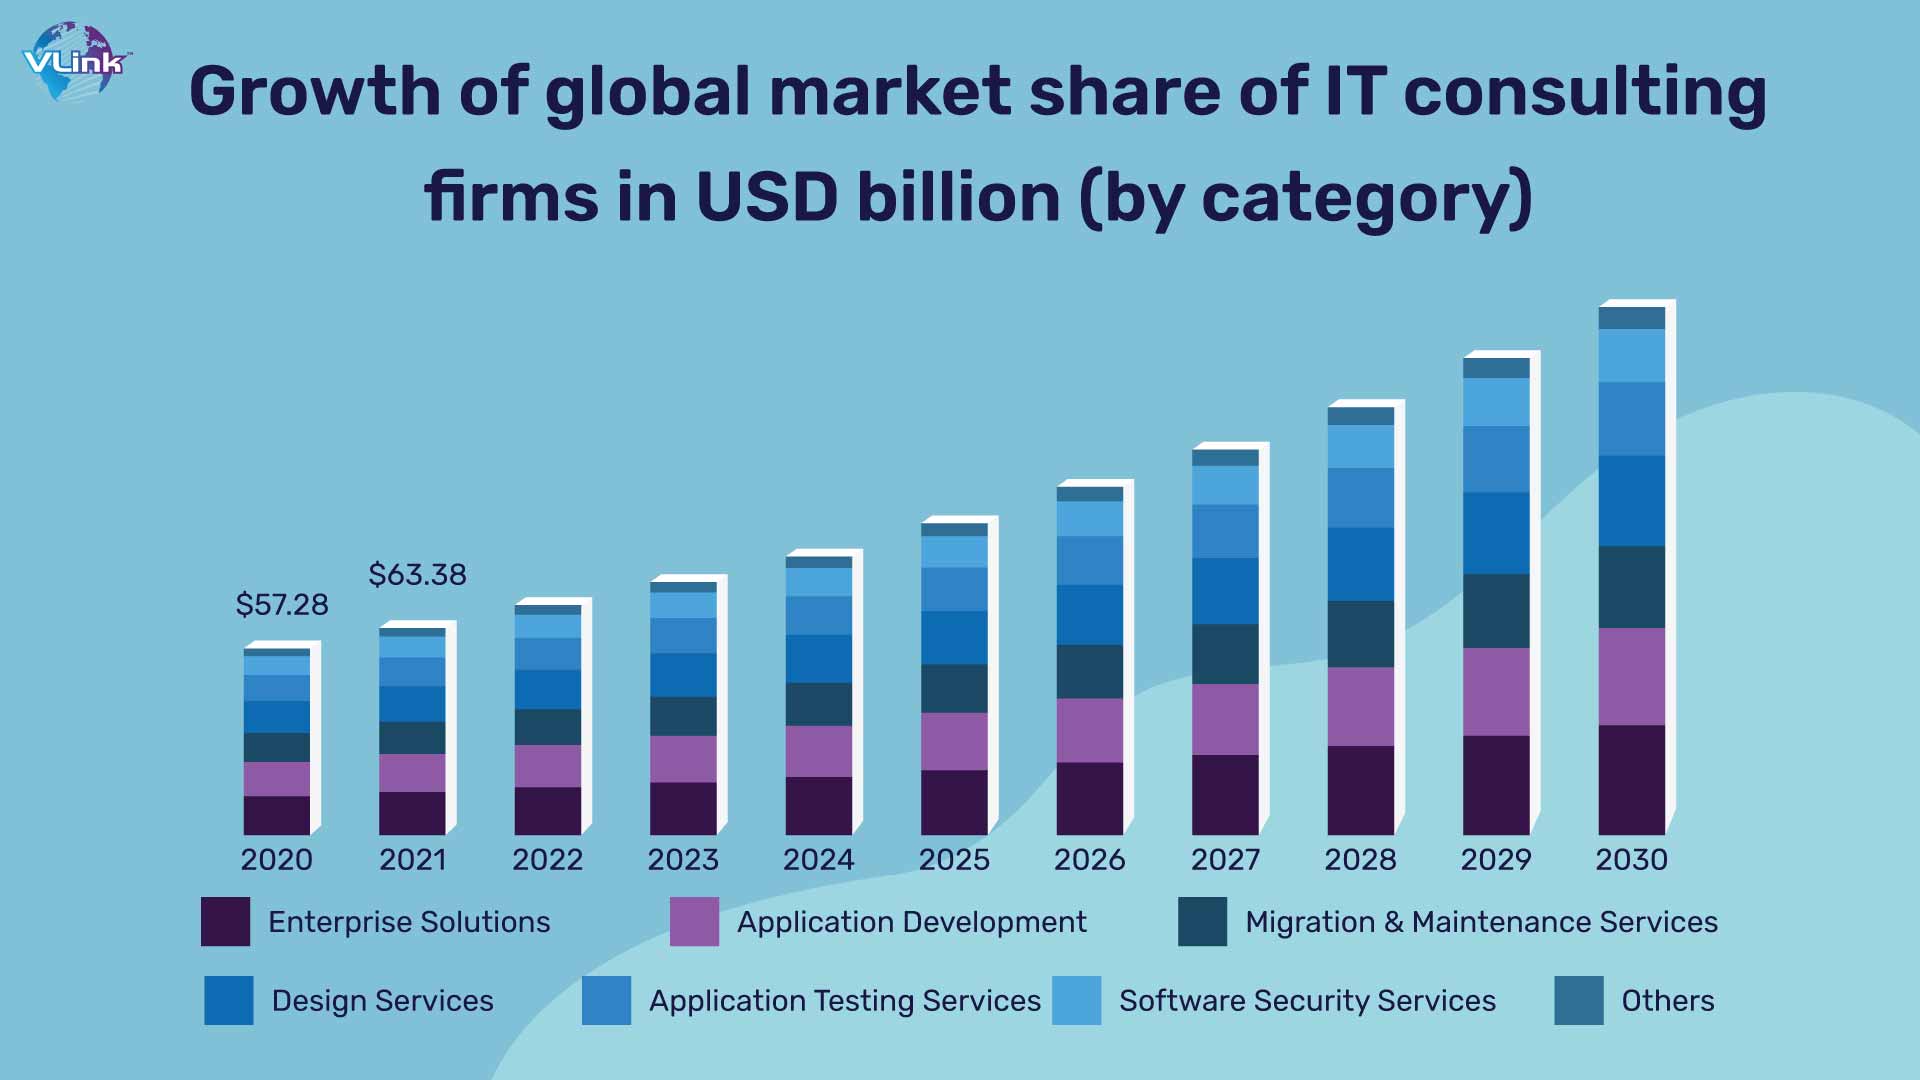 Growth of global market share of IT consulting firms in USD billion (by category)